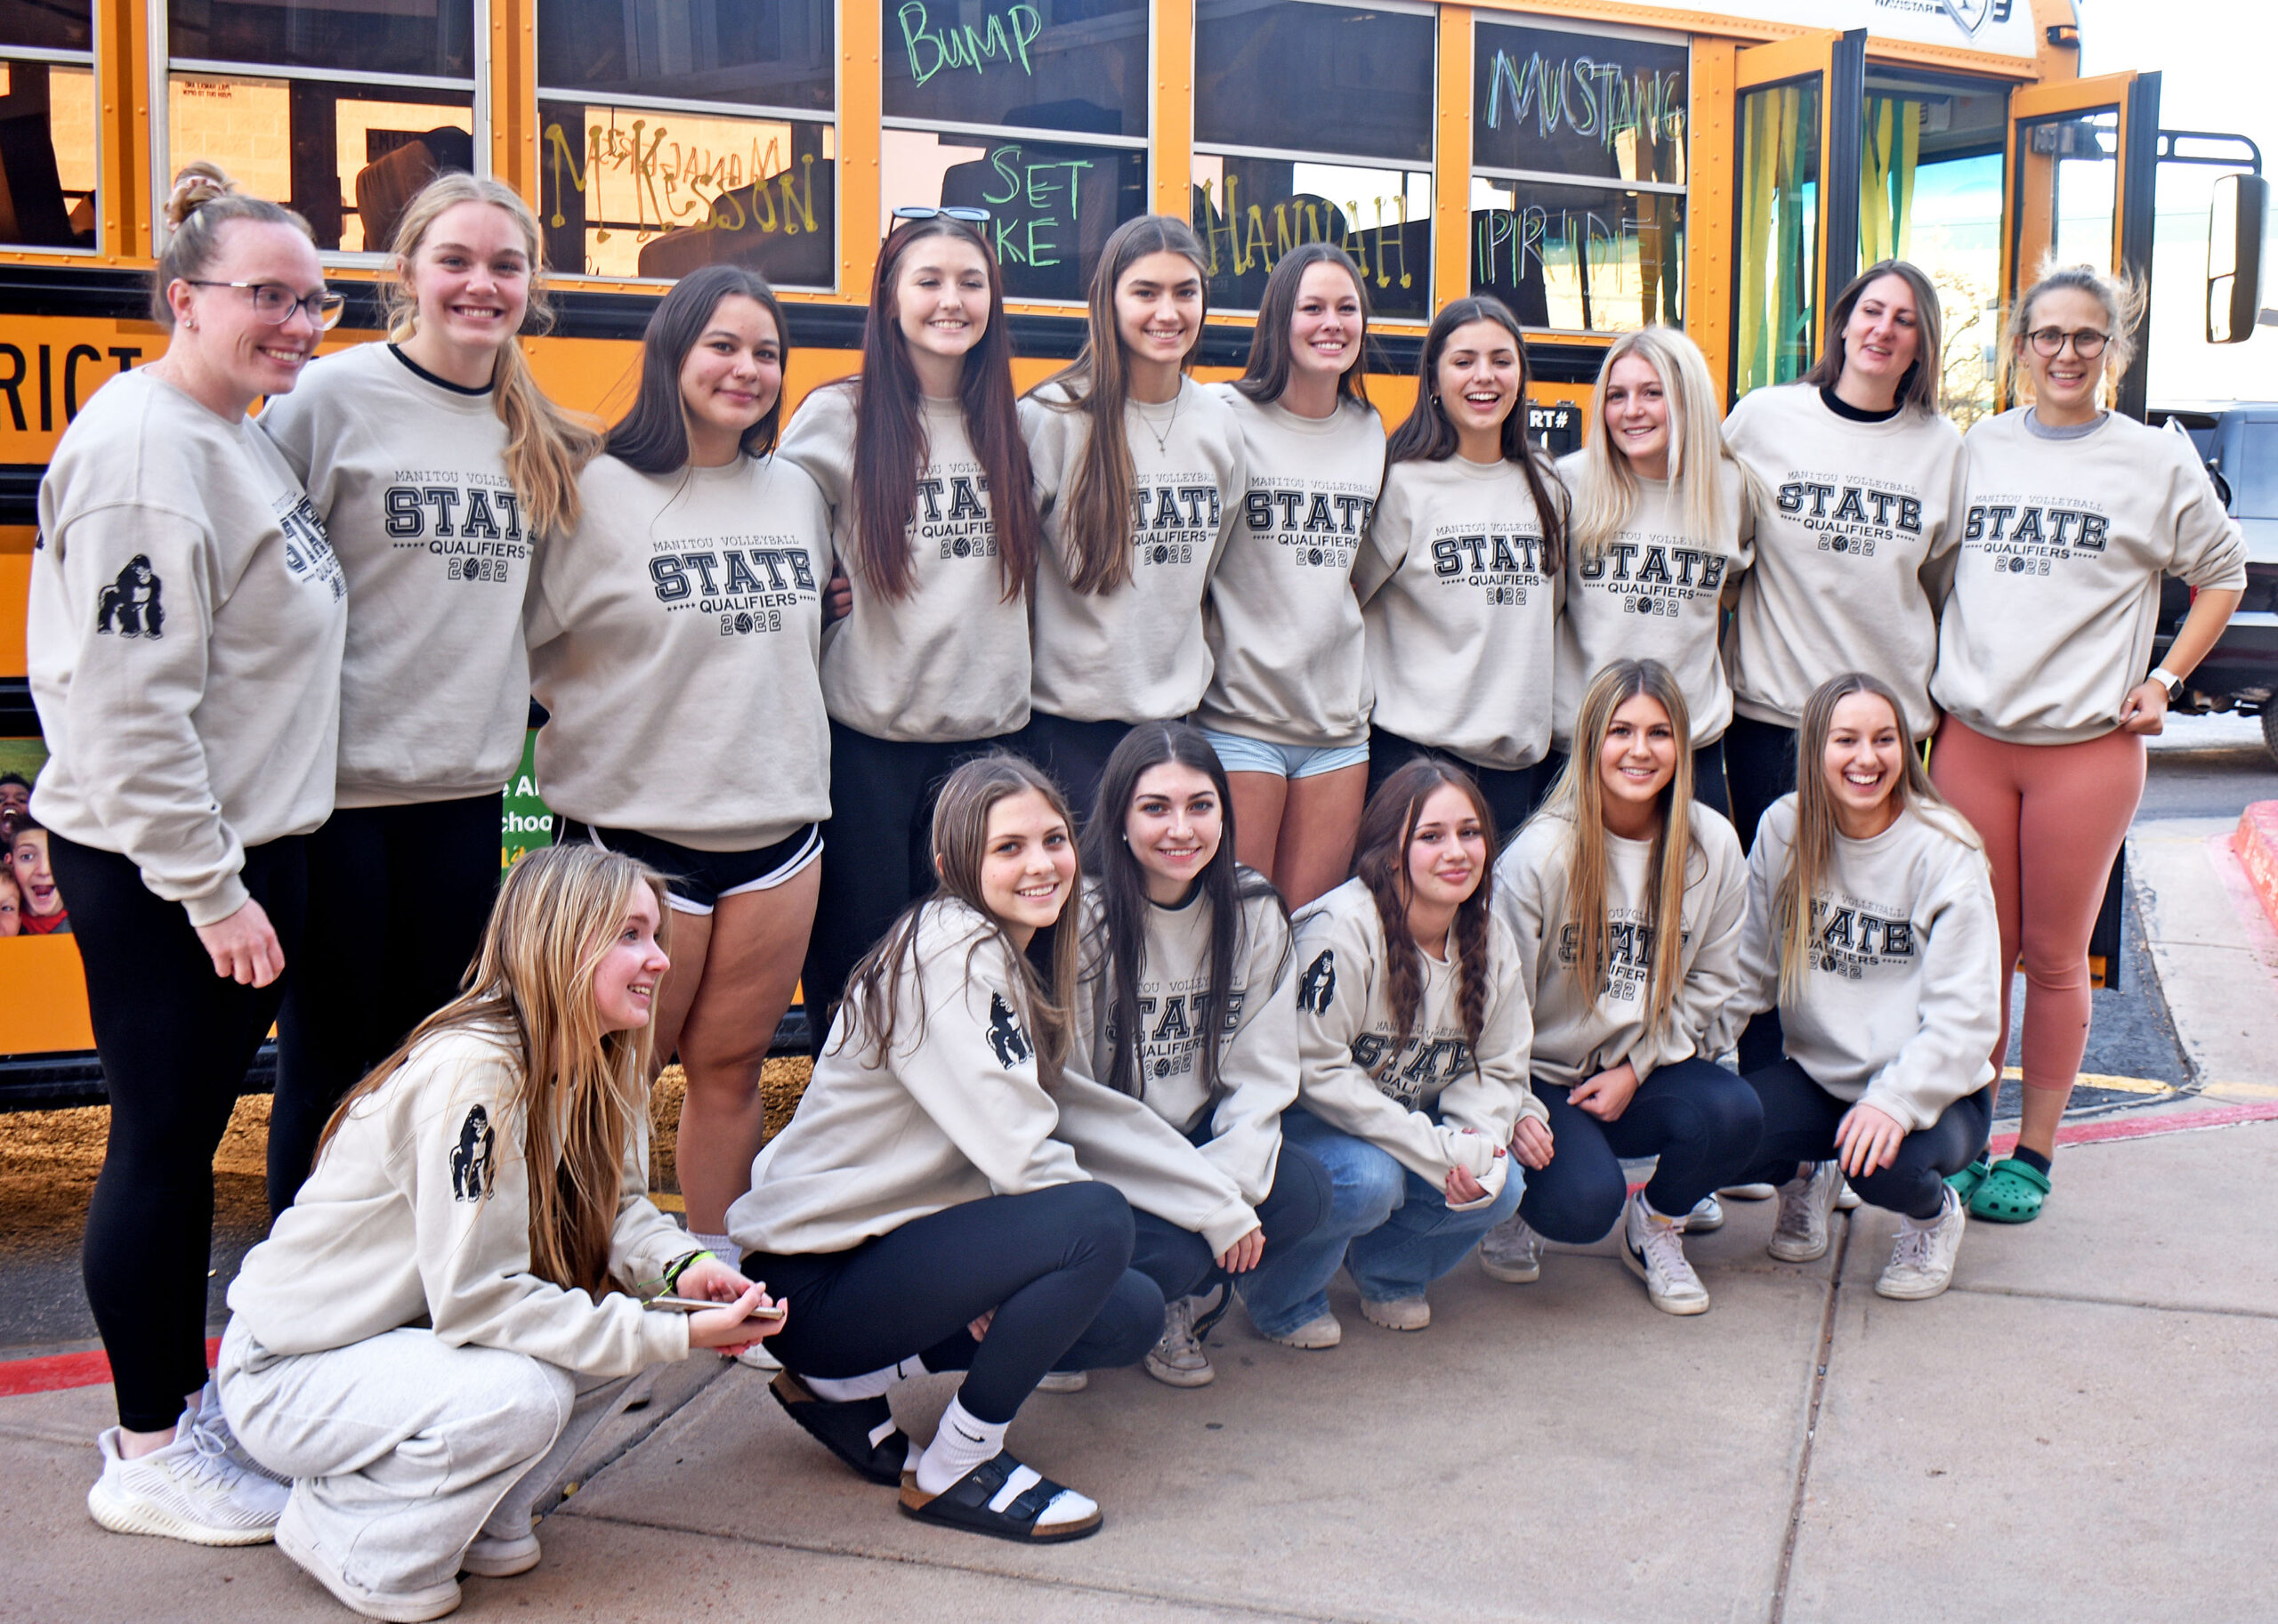 Photo by Rhonda Van Pelt. The Manitou Springs High School volleyball players and coaches pause for photos before heading to the 3A State Championships on Wednesday, Nov. 9. Standing, from left: assistant coach Kimmie Beach, Sierra Dunlap, Maria Perez, Hannah Ruger, Grace Allen, Teryn Thime, Lily Glass, Ayla Flett, head coach Crissy Leonhardt and assistant coach Gabby Santos. Front, from left: Morgan Flannery, Chloe Arnoldusson, Cassidy Blechman, Hannah Mellinkoff, McKesson Rhodes and Norah Jorstad.